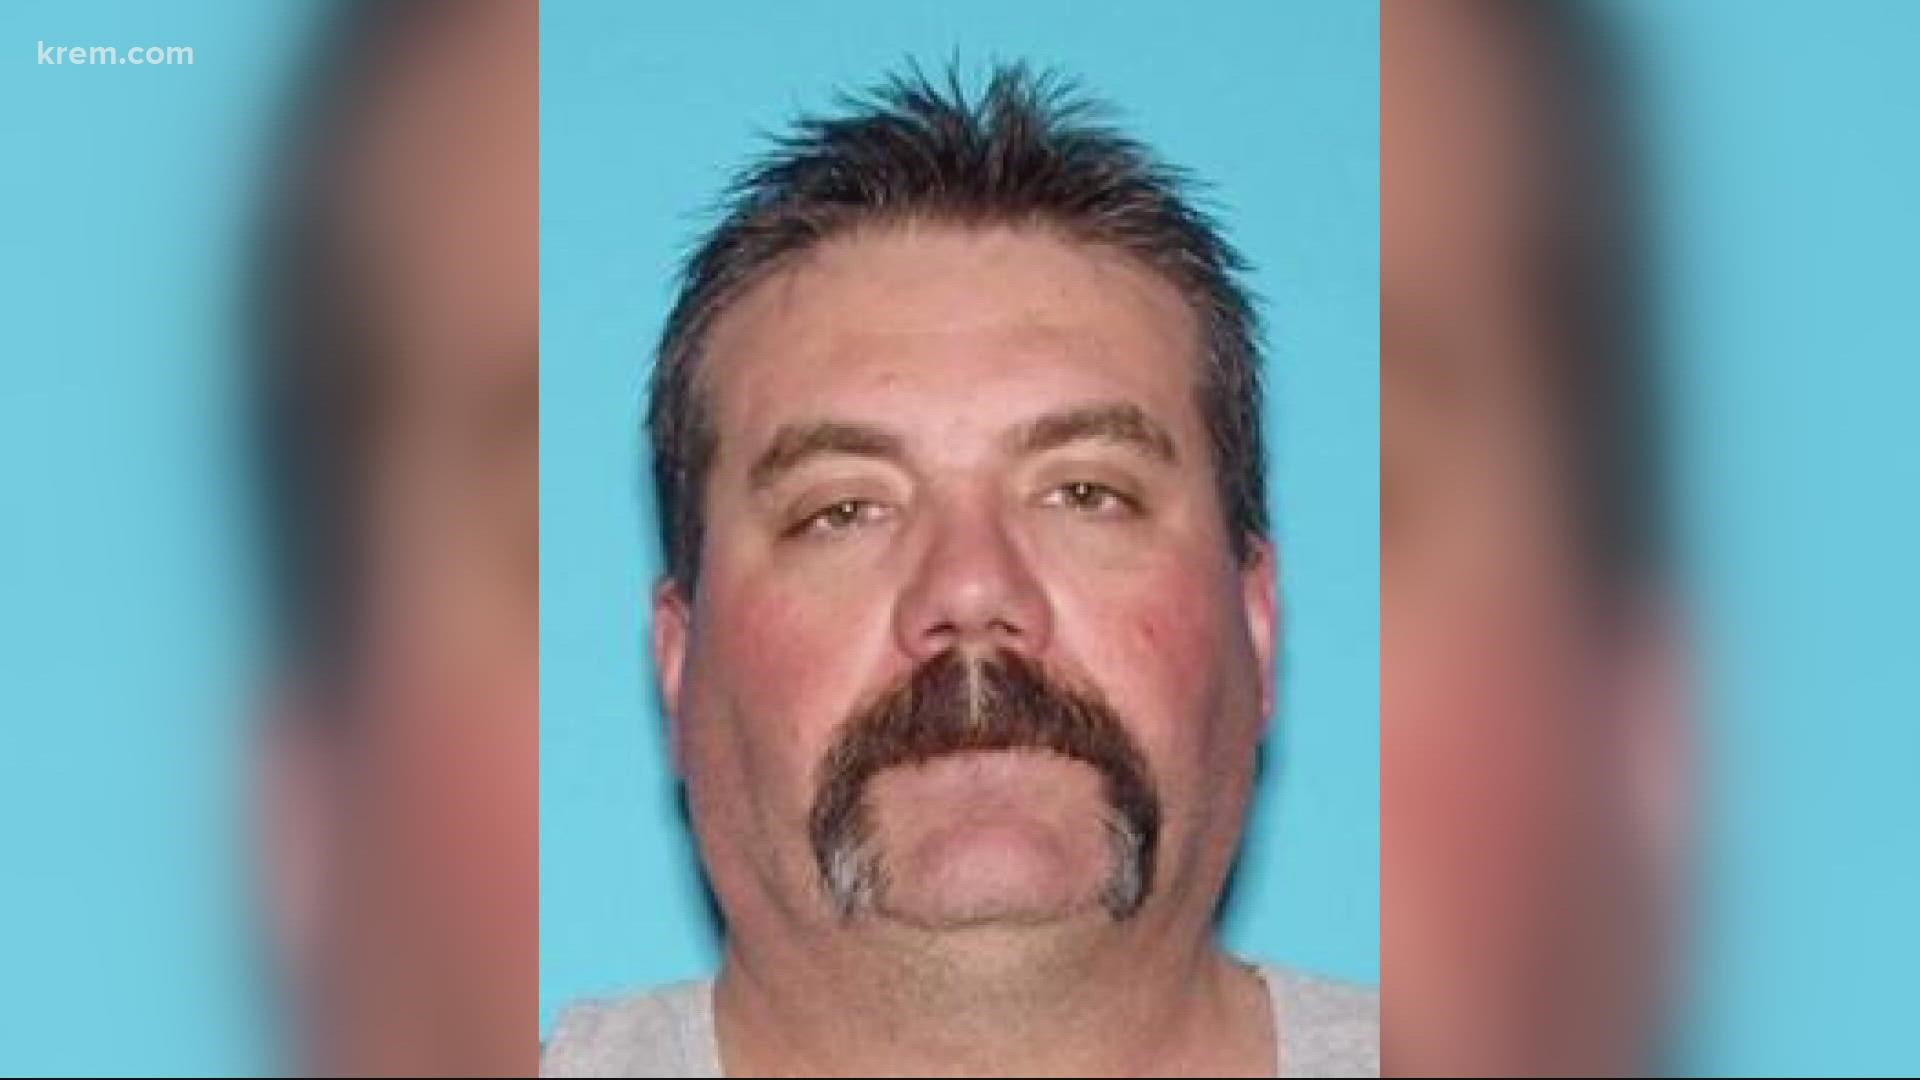 John D. Dalton Jr. was reportedly in a long-term relationship with the victim and had not been seen since the night of her death.